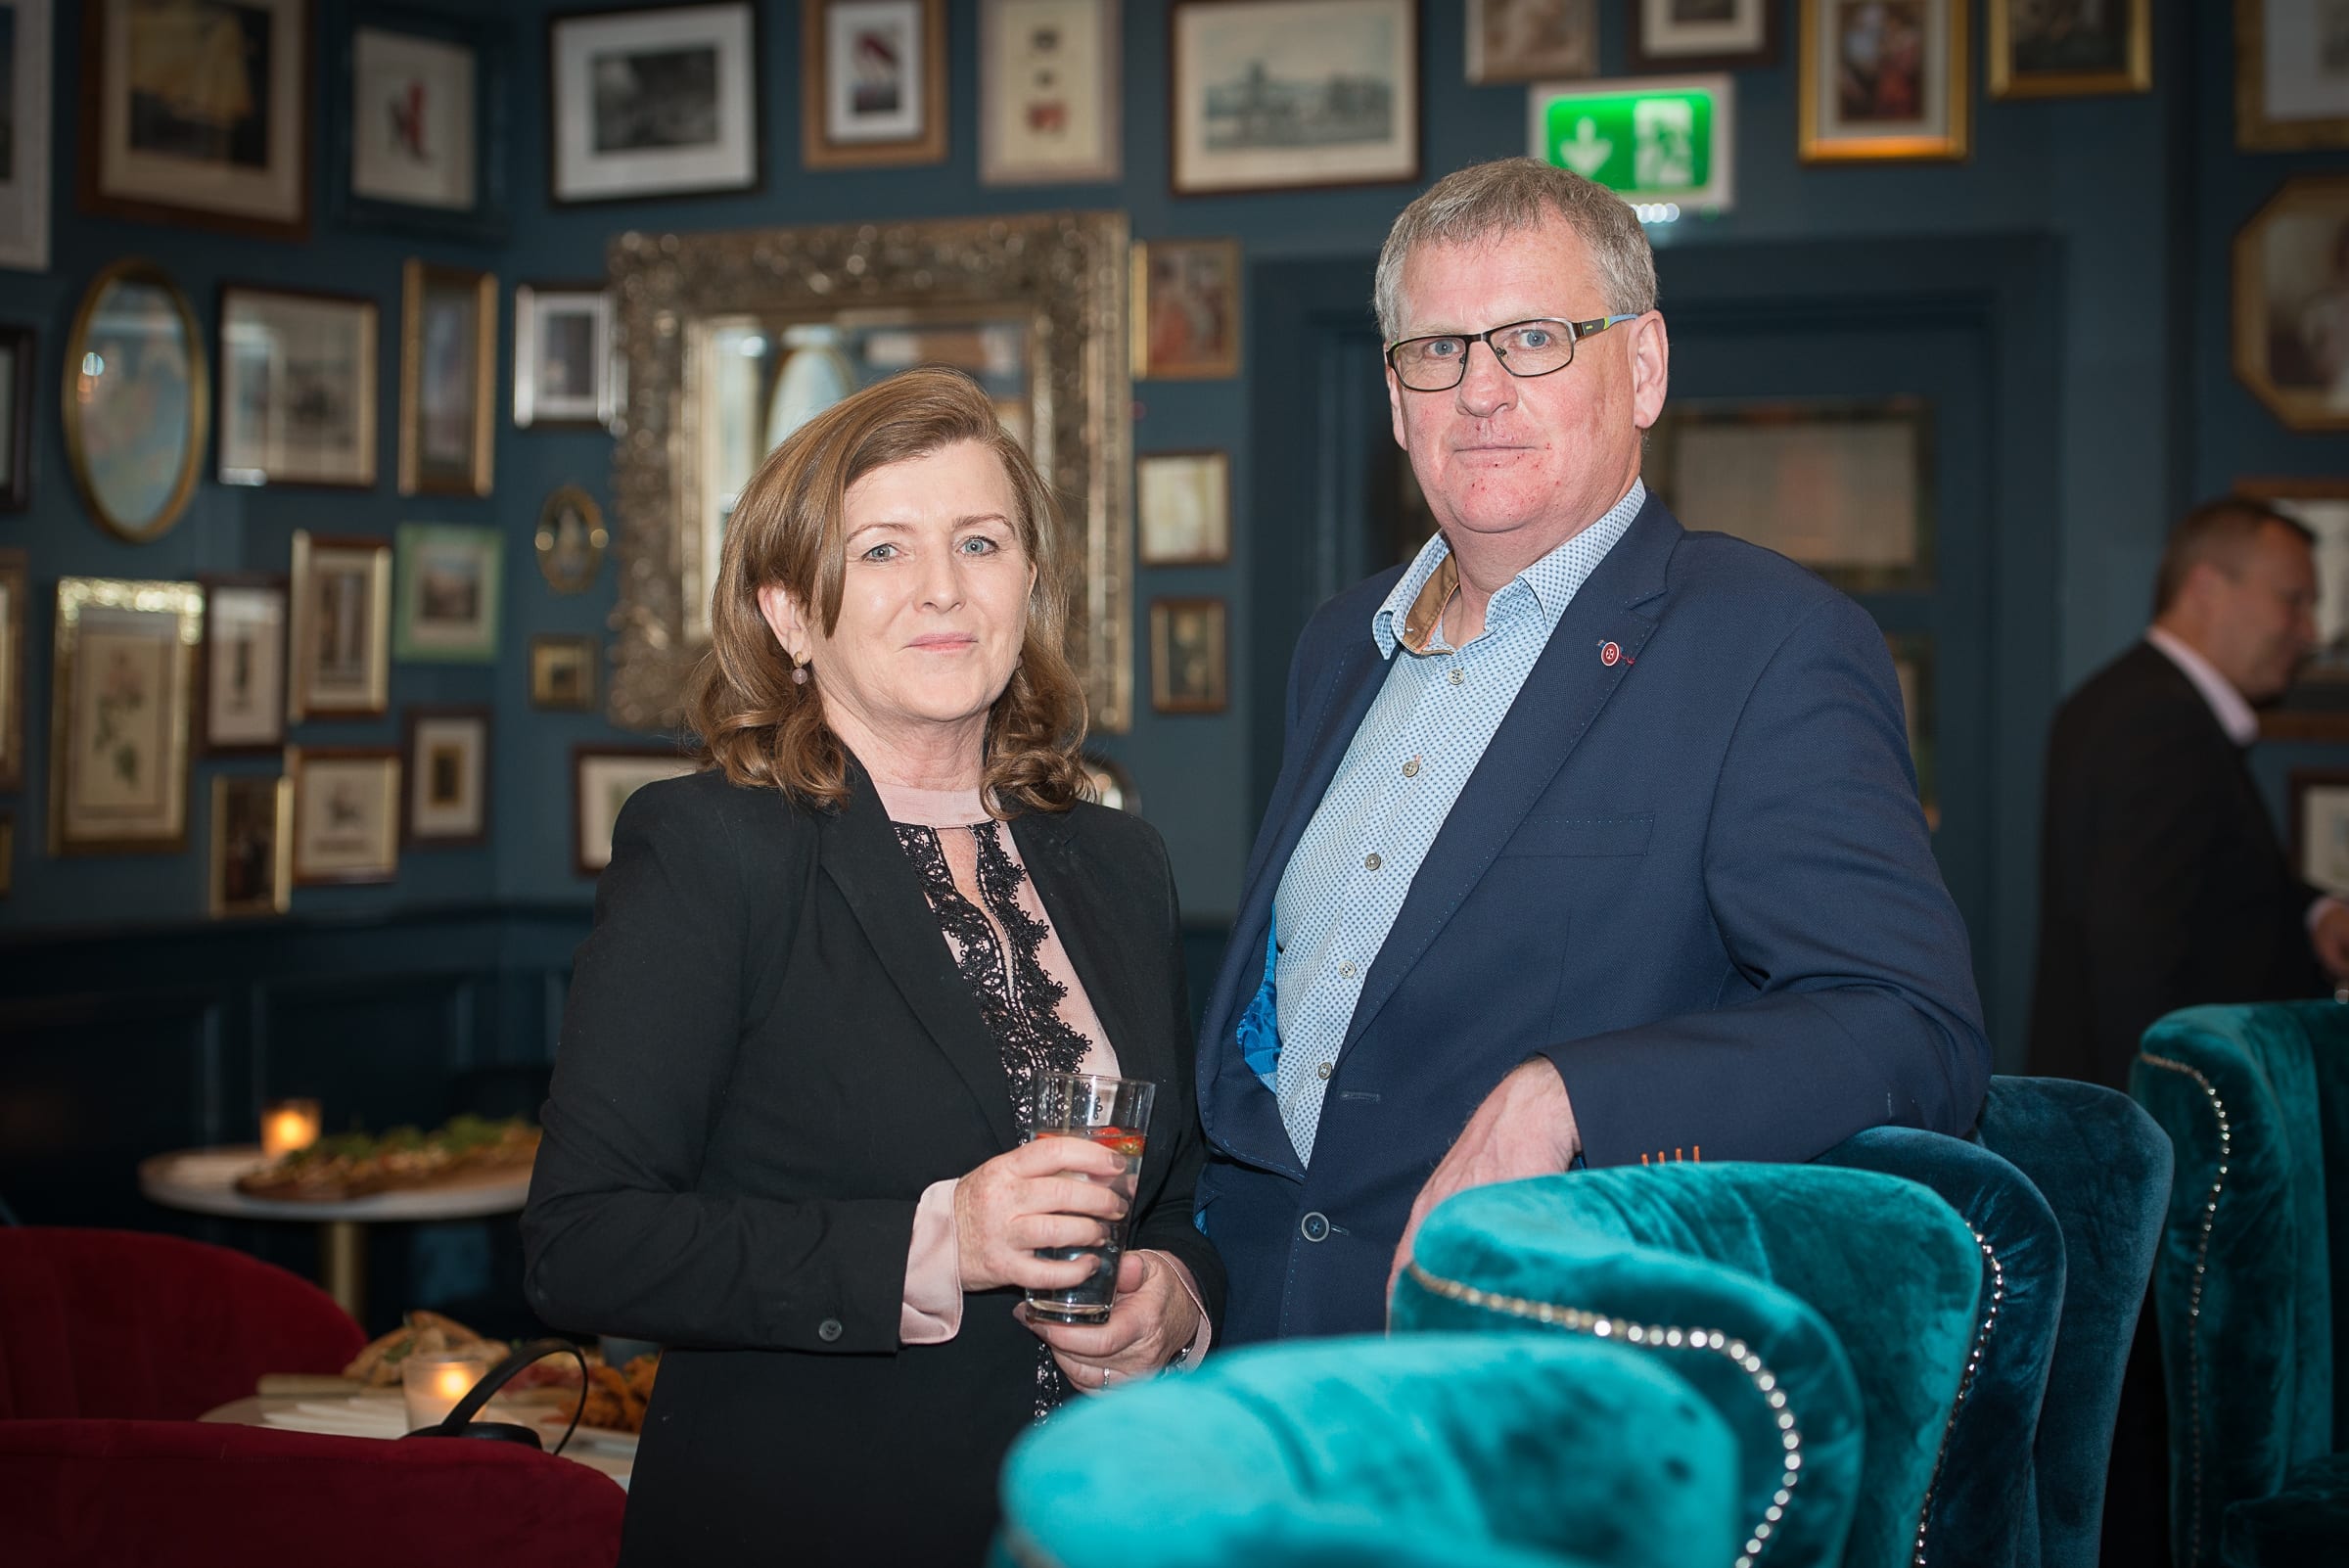 No repro fee: Networking with a Difference held in 101 O’Connell Street. Facilitated by Stephen Pitcher.  23-05-2019, From Left to Right: Patricia Hough - Limerick and Clare Training Board, Stephen Pitcher- Facilitator / Stephen Pitcher.ie. 
Photo credit Shauna Kennedy